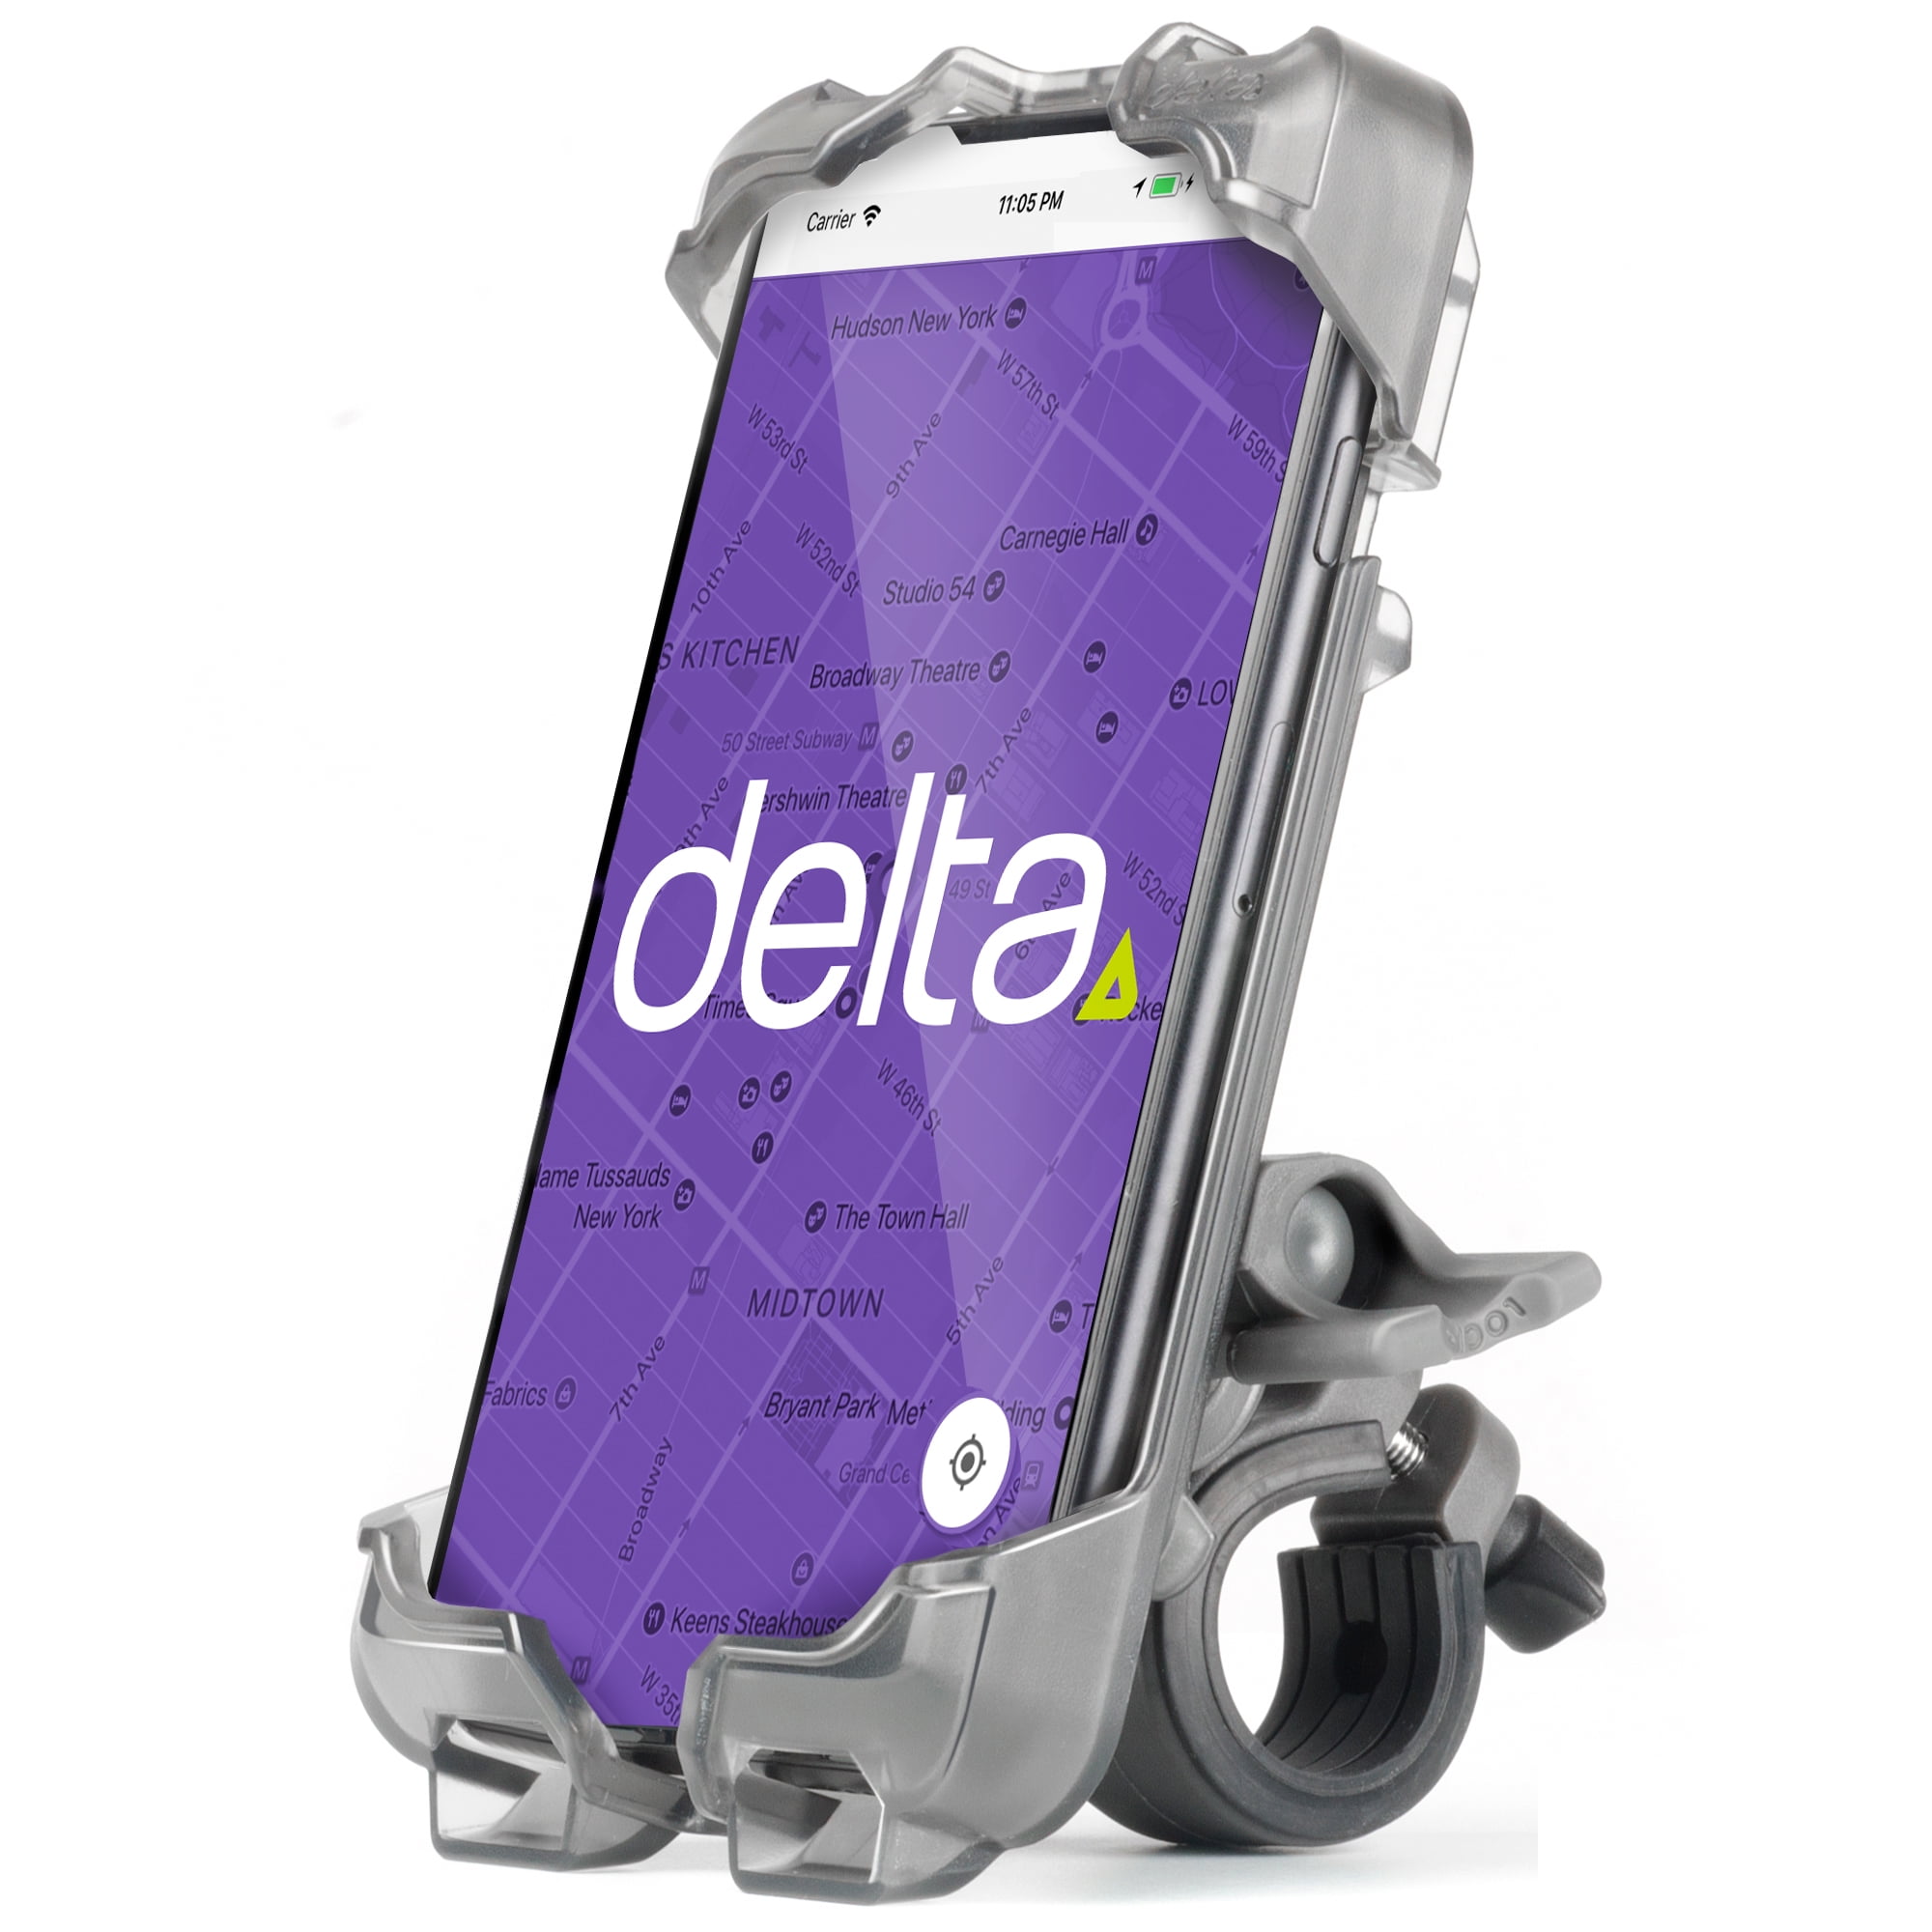 Delta Smartphone Caddy for sale online 